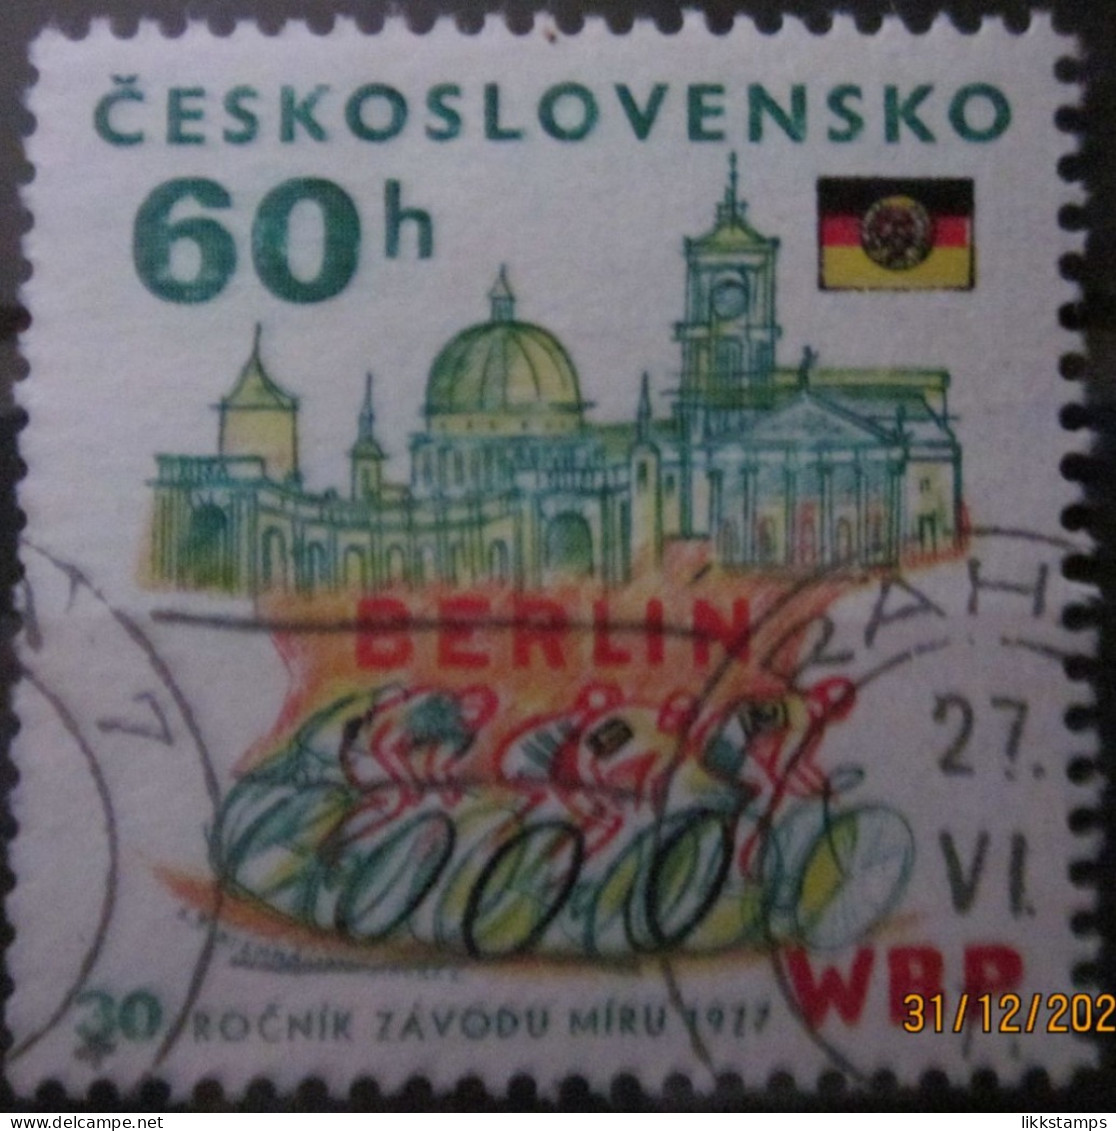 CZECHOSLOVAKIA 1977 ~ S.G. 2333, ~ THE 30th ANNIVERSARY OF THE PEACE CYCLE RACE. ~ VFU #03195 - Gebraucht